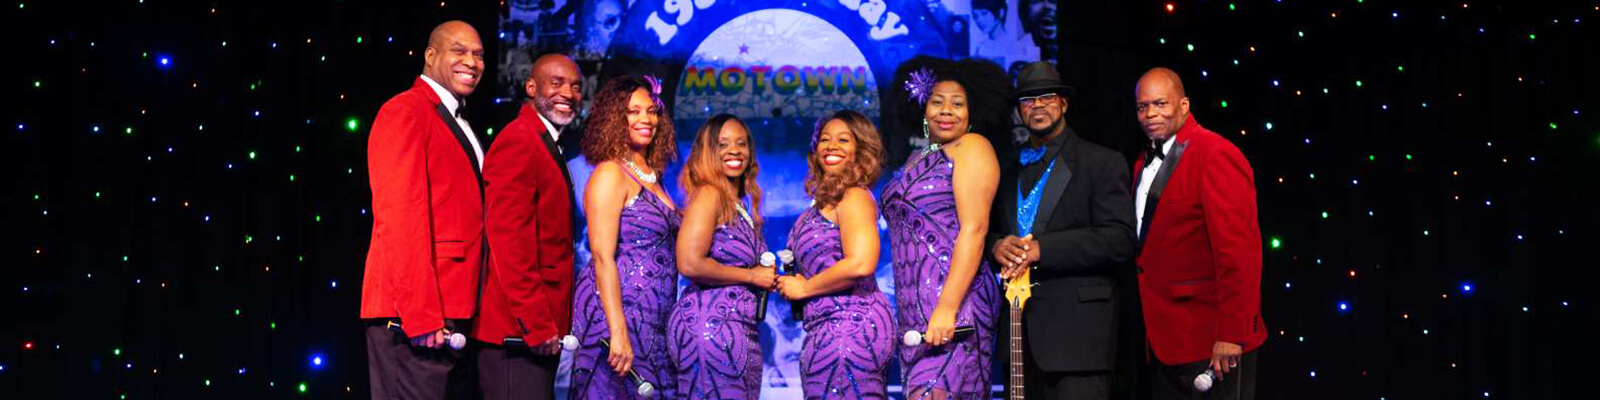 Motor City Musical Myrtle Beach Coupons